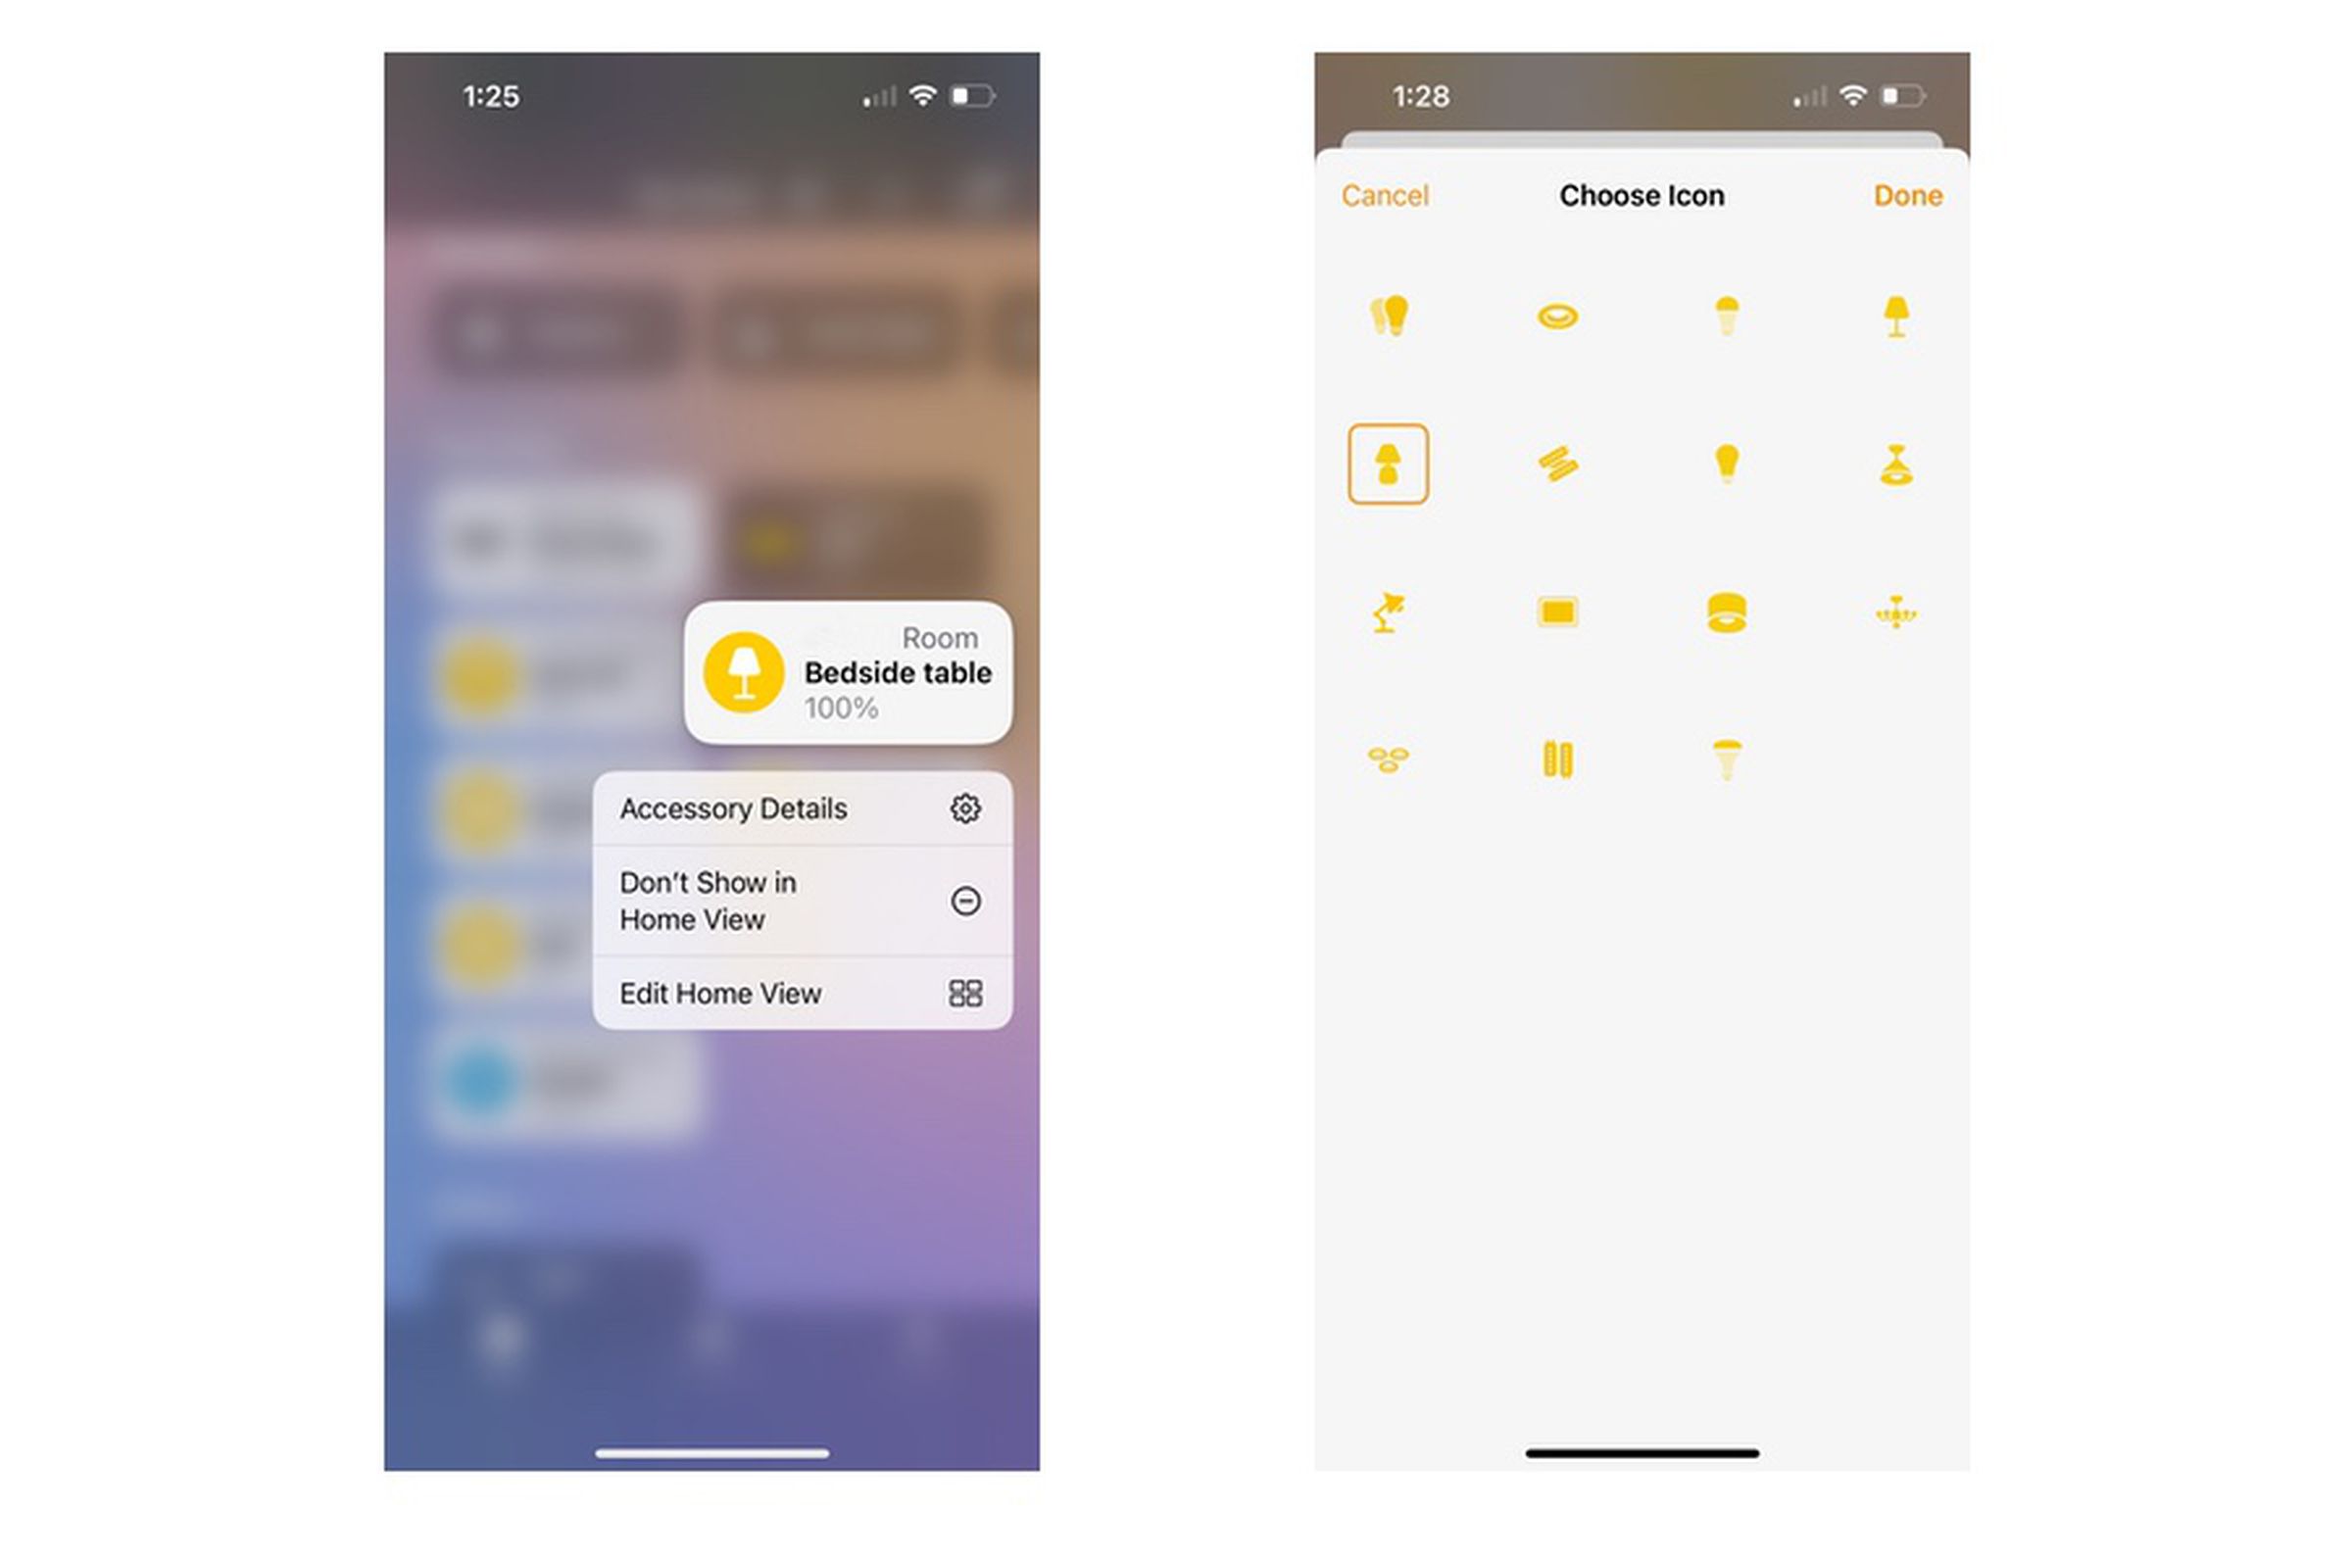 Buttons (tiles) now have a pop-up menu for more functions and more icon options, which makes it easier to find the device you want to control.